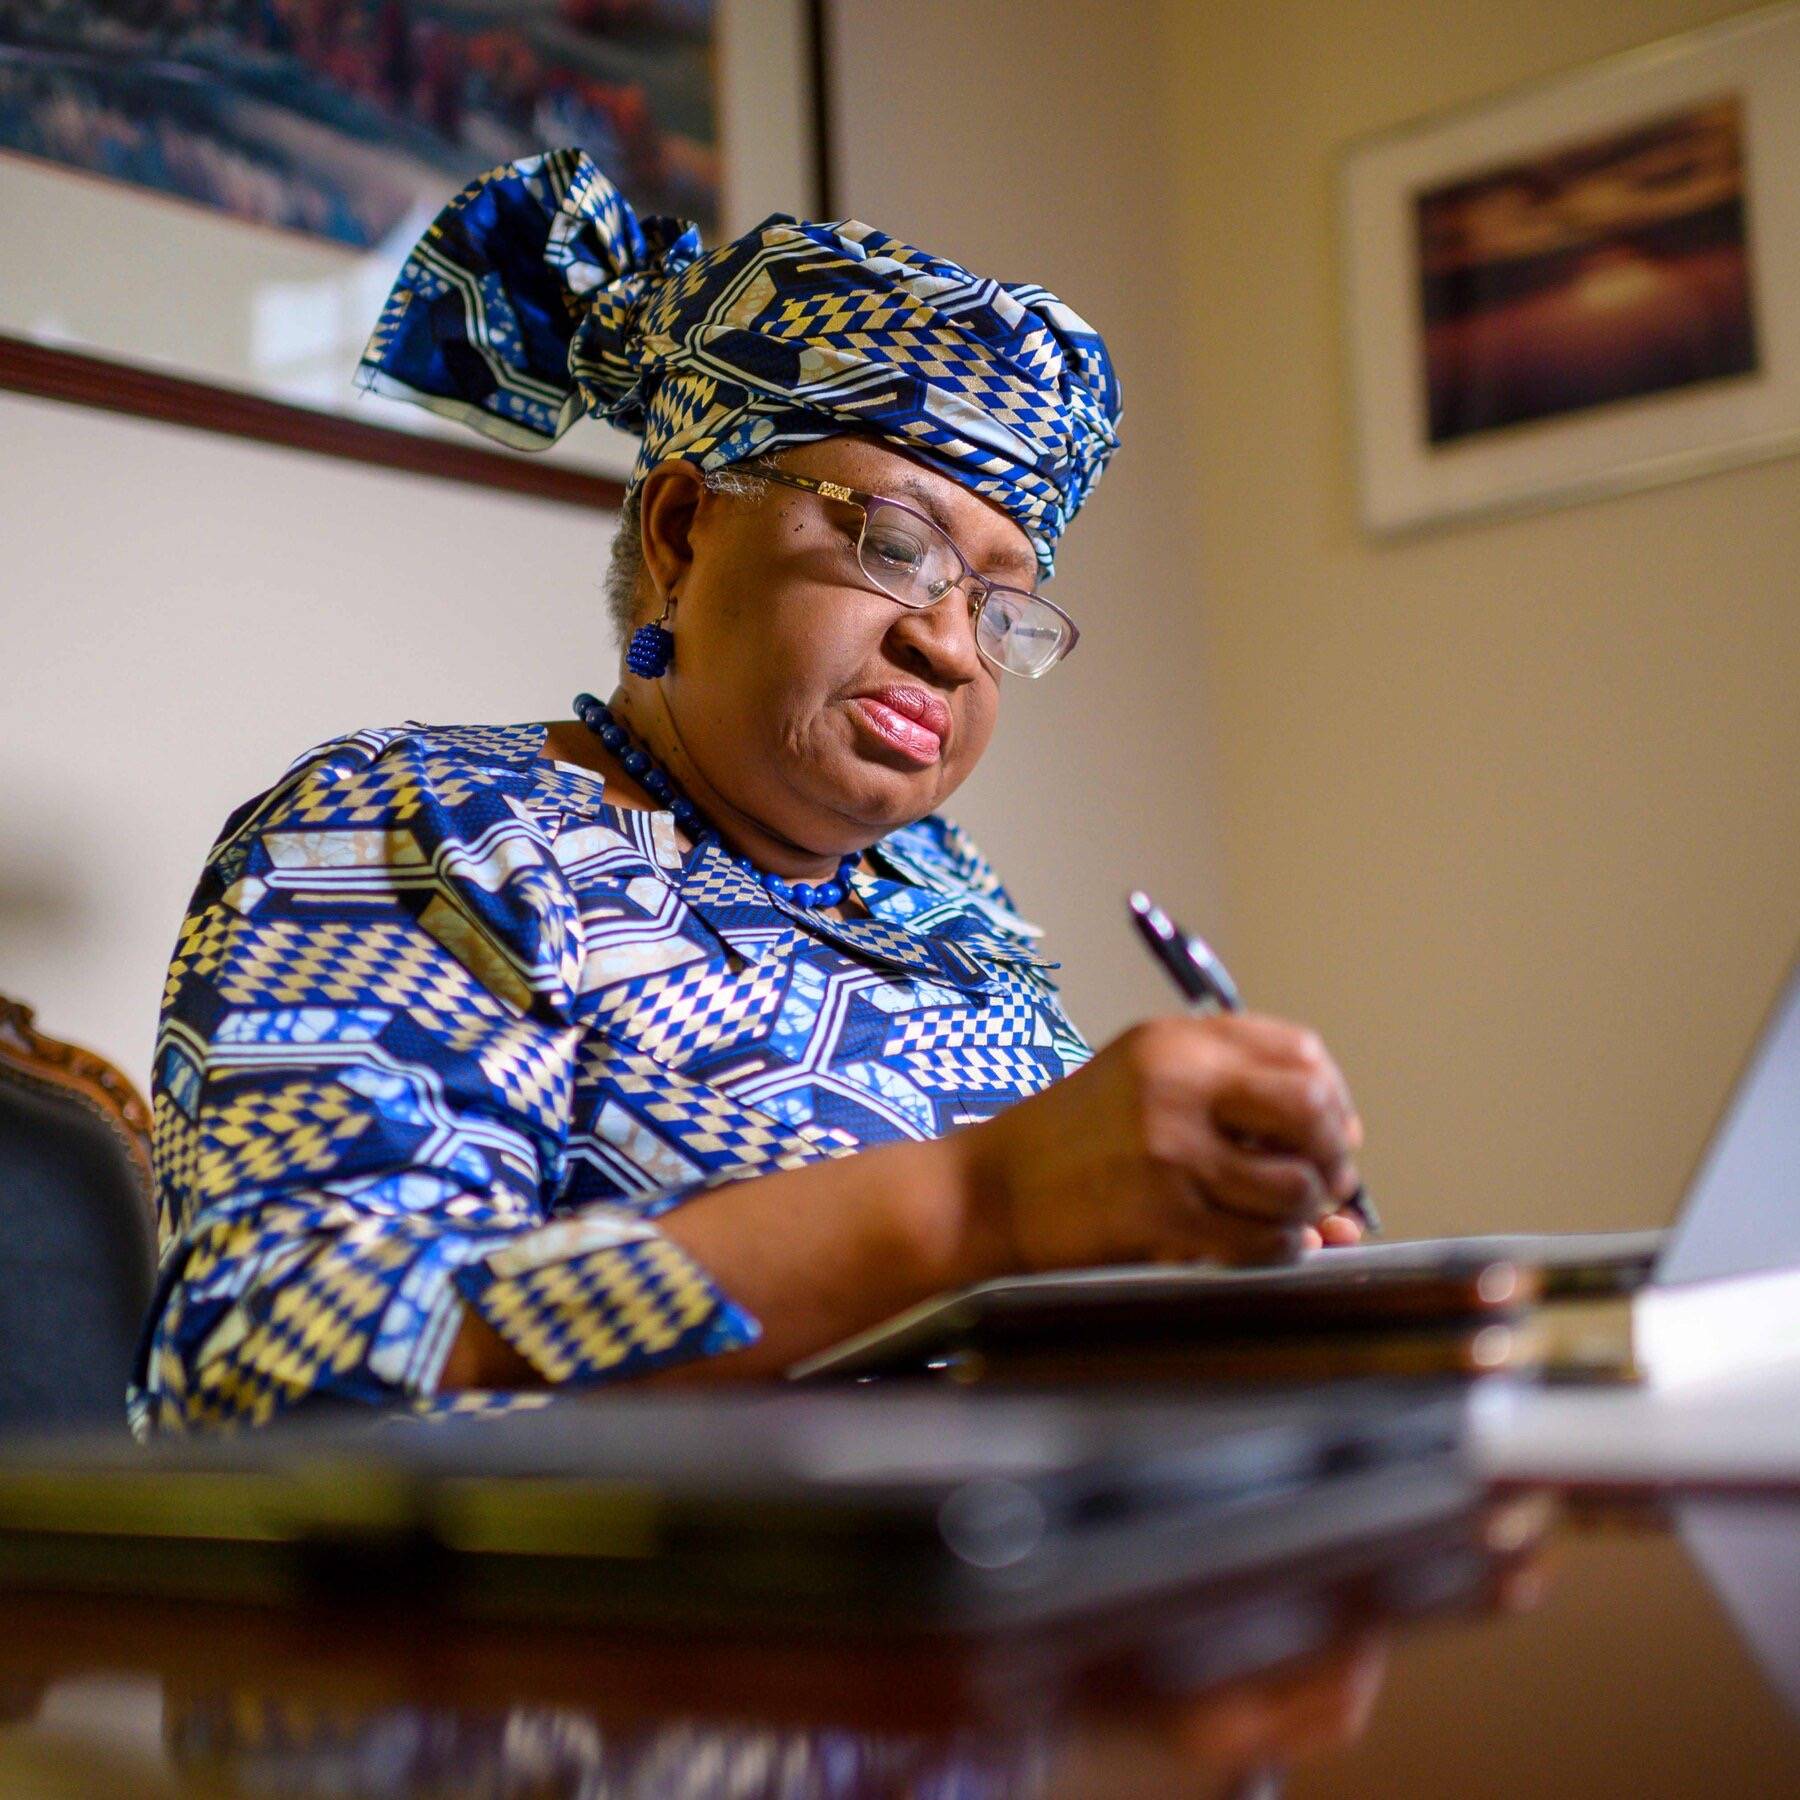 W.T.O Officially Selects Okonjo-Iweala as Its Director-General the first African women